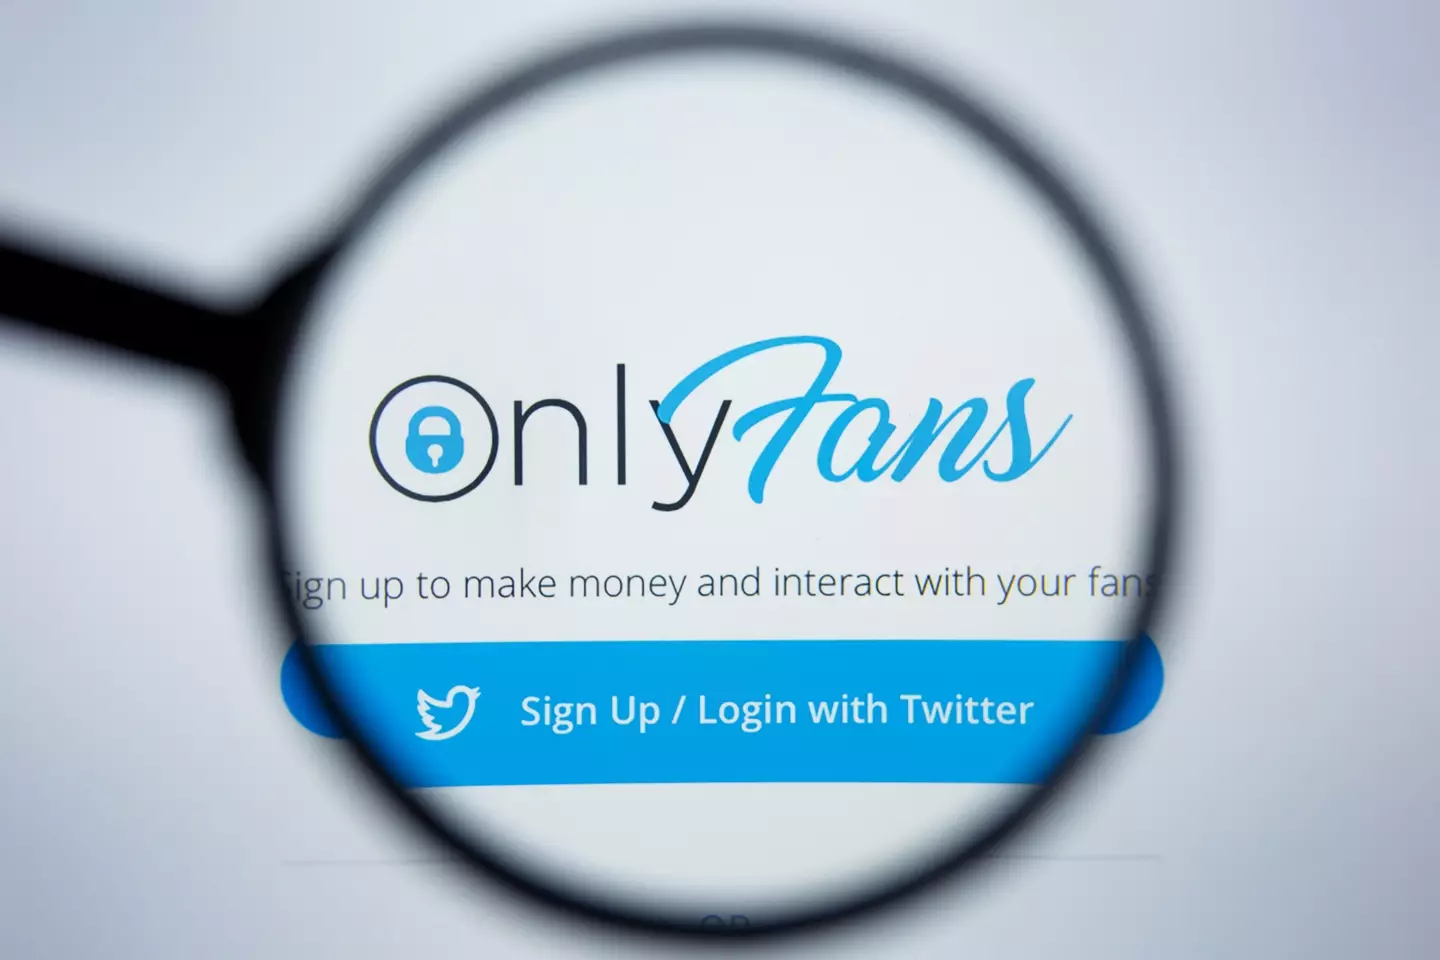 OnlyFans had a spike in users during lockdown.